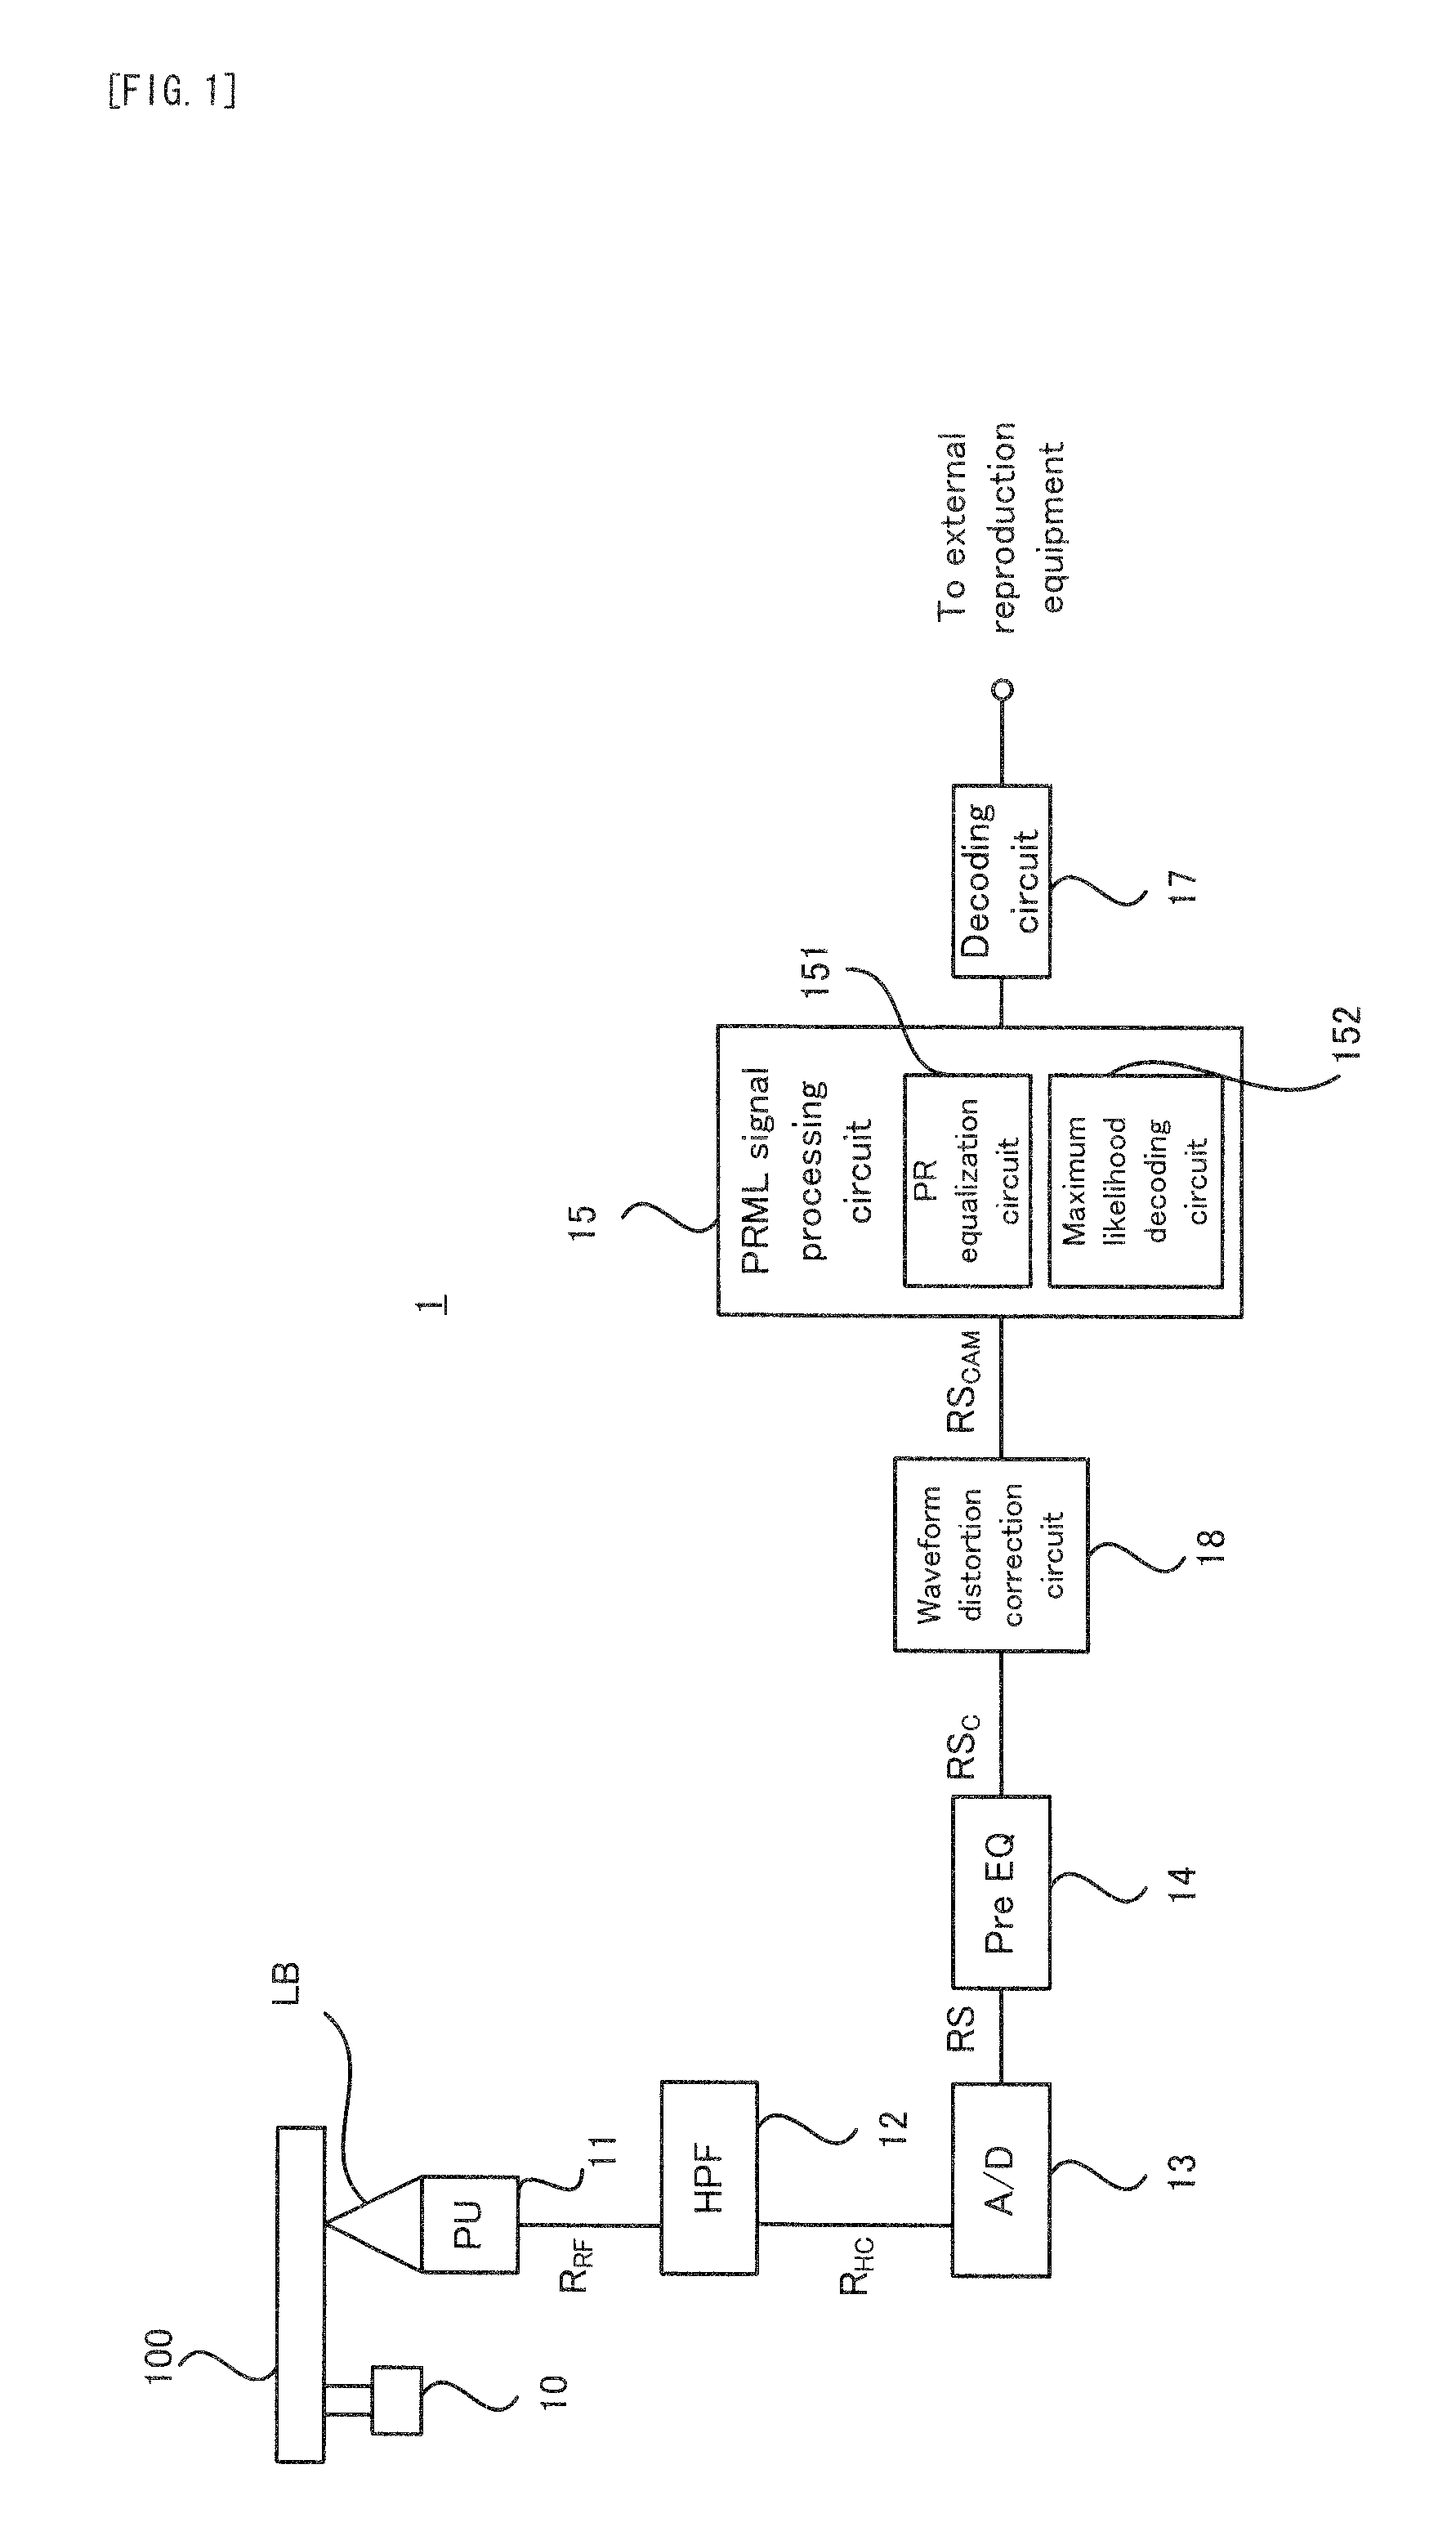 Device and method for reproducing information, and computer program